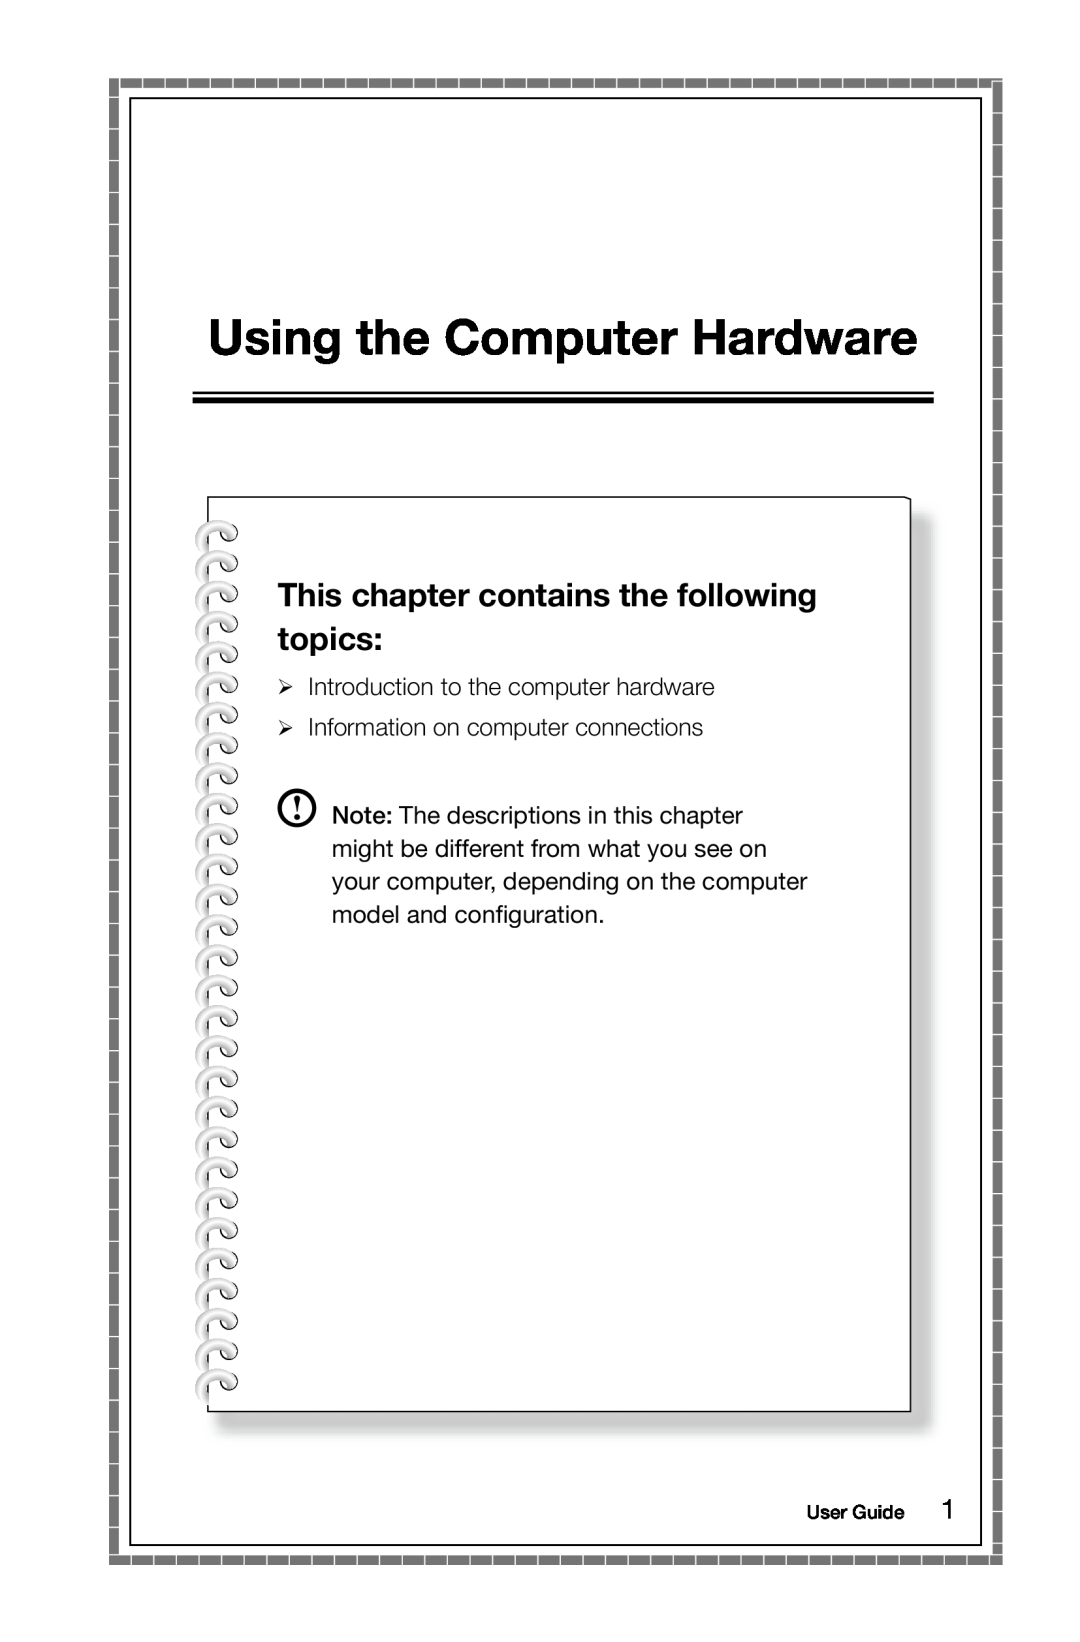 Lenovo A7 manual Using the Computer Hardware, This chapter contains the following topics, User Guide 